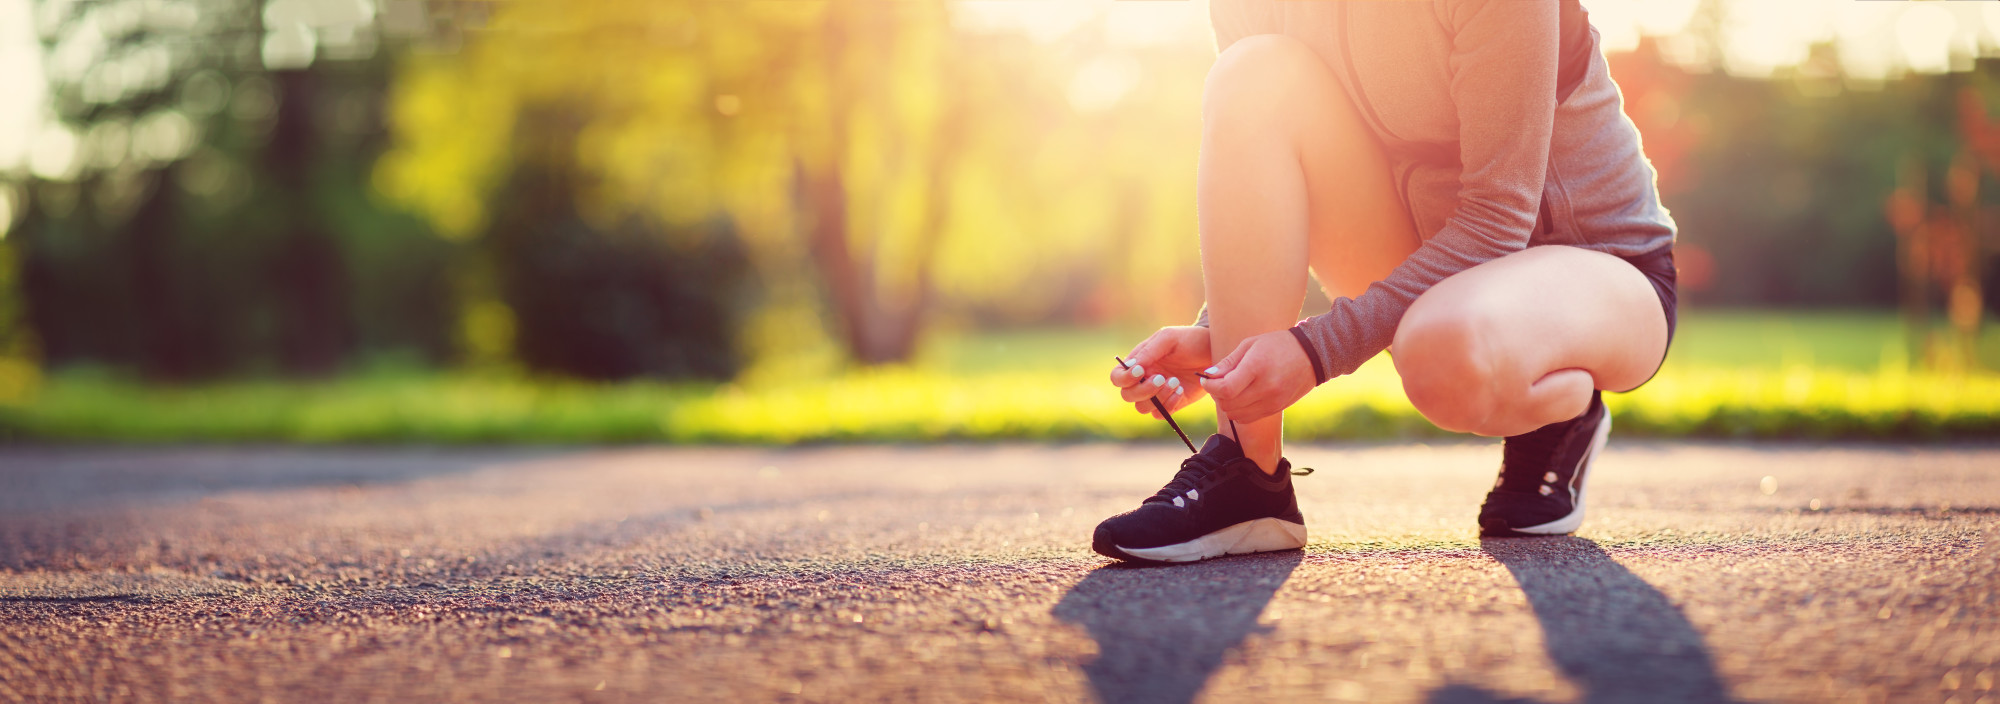 What to Do After a Run: 6 Post Running Tips